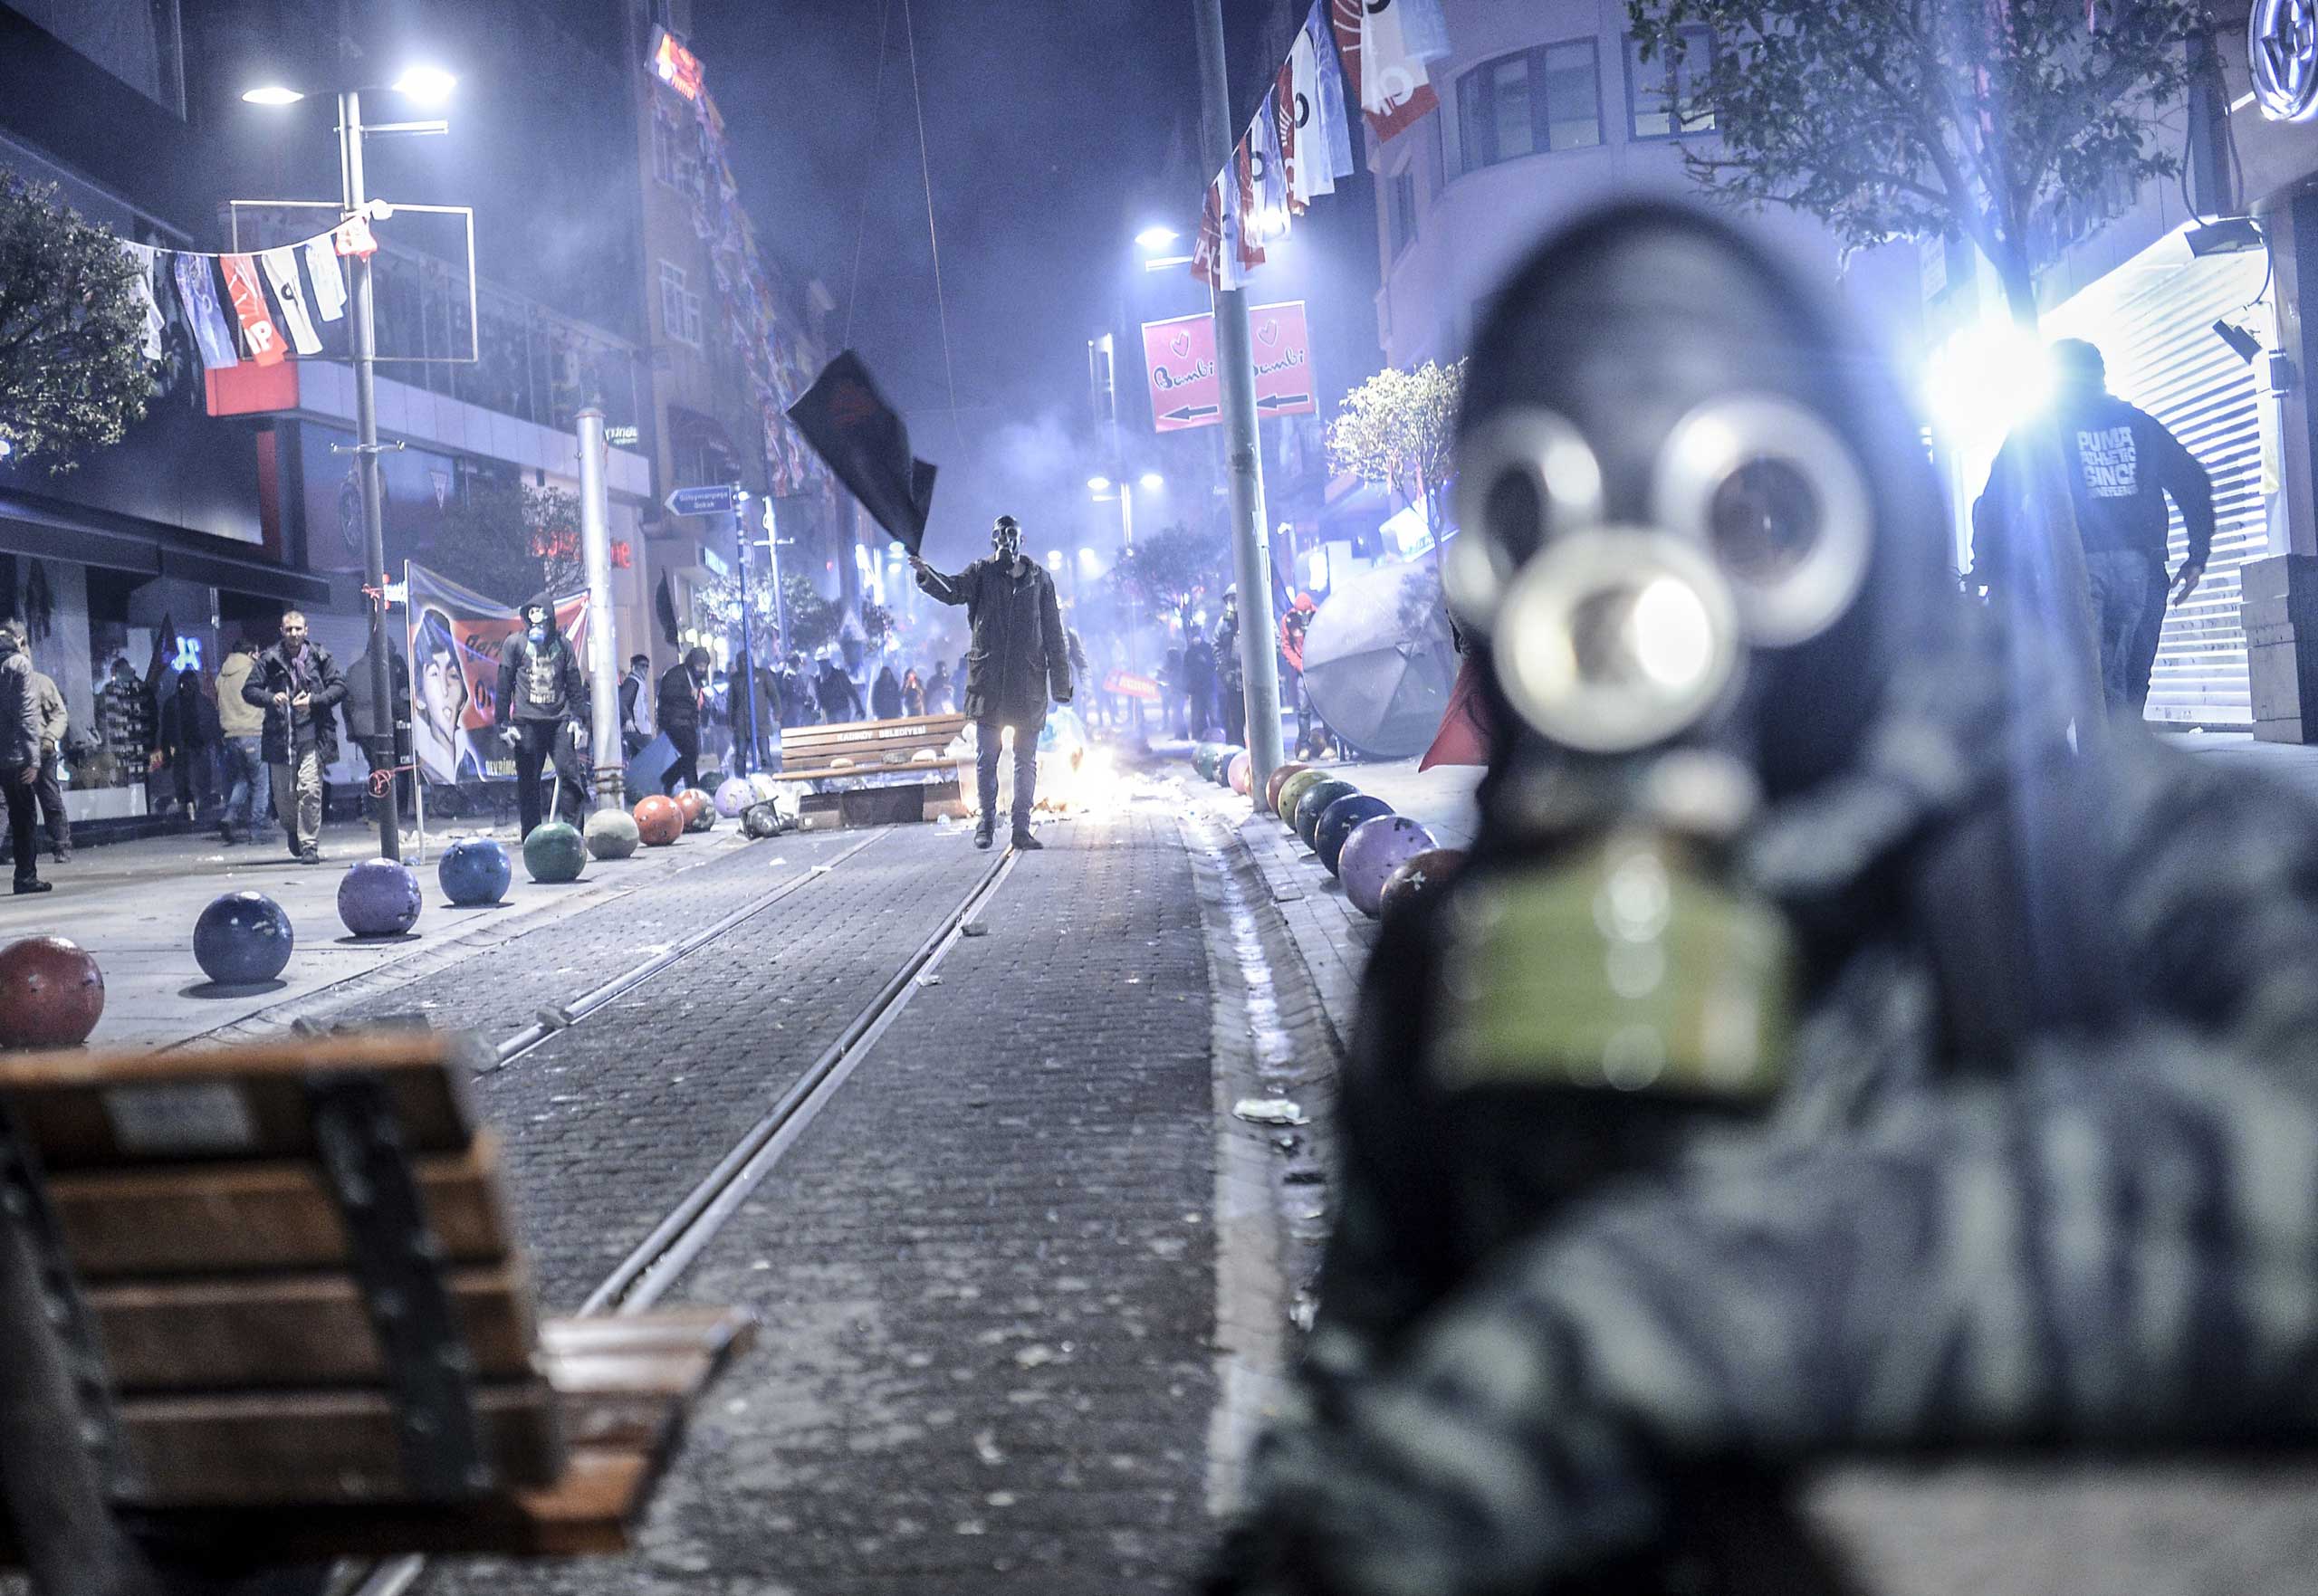 Turkey: Protests after the death of a teenage boy  who had been left comatose during a police crackdown on anti-government protests in 2013A protester waves a black flag during clashes with riot police in Kadikoy, on the Anatolian side of Istanbul, on March 11, 2014.